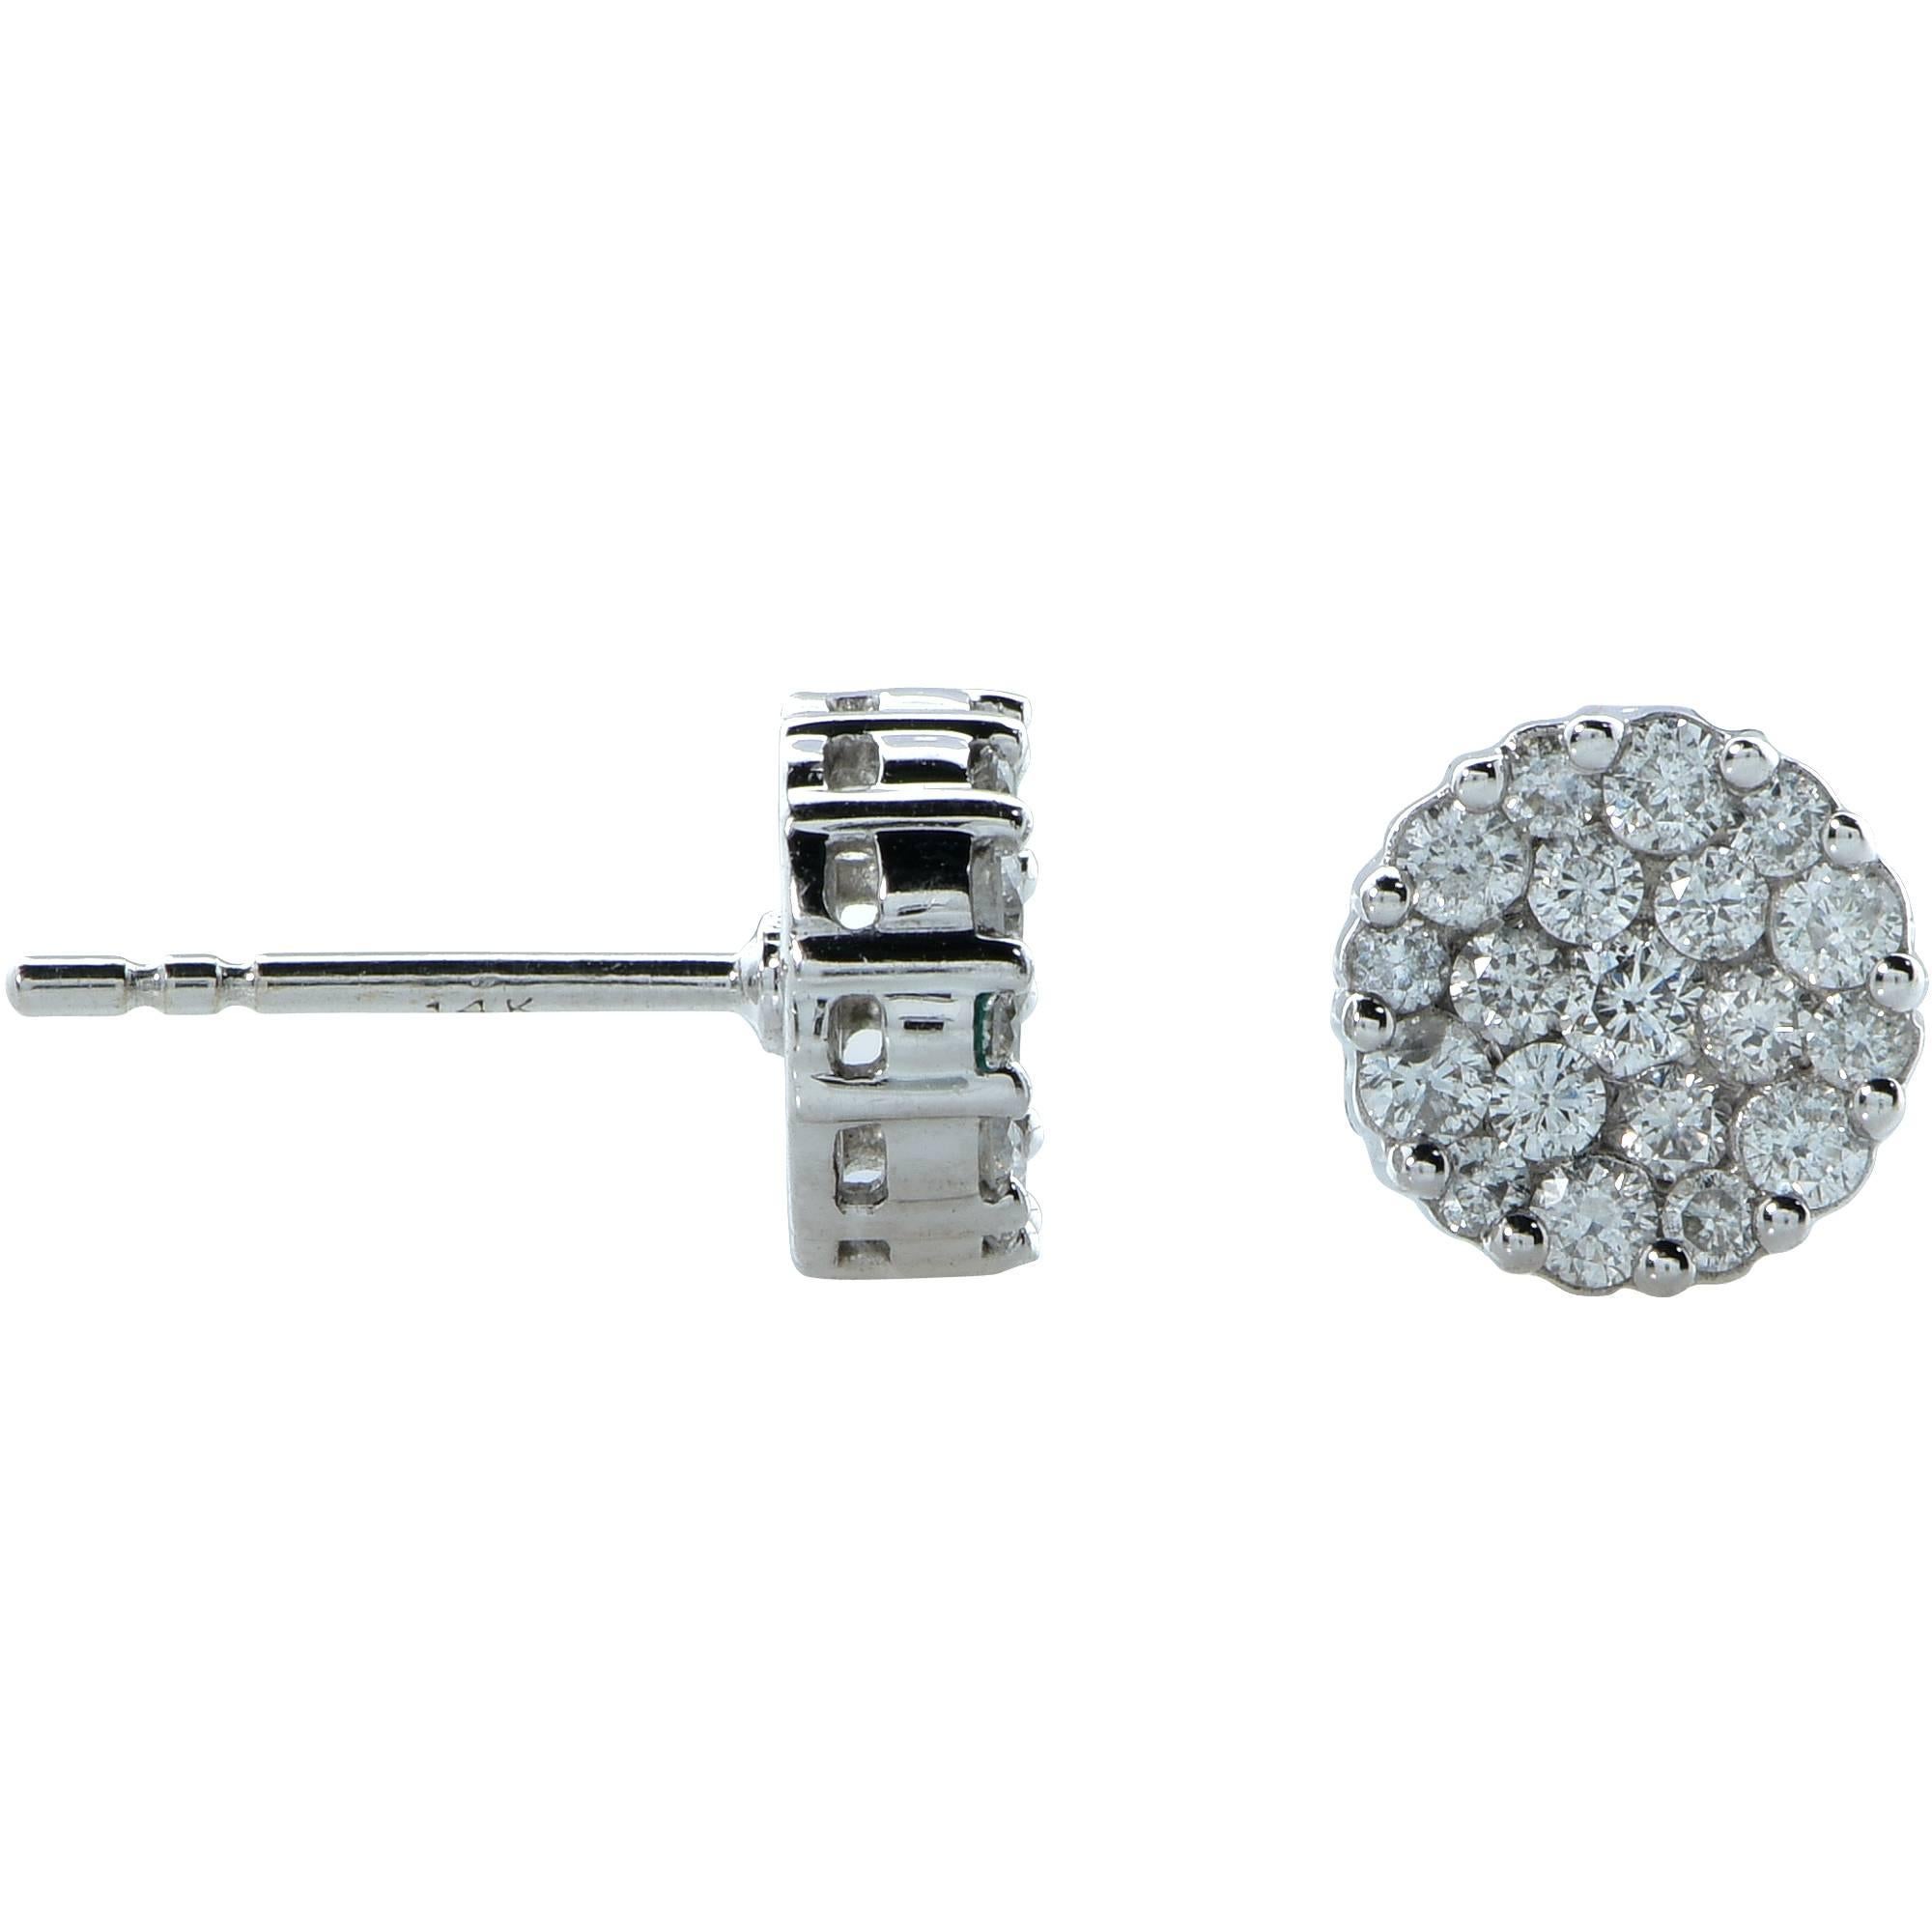 14k white gold cluster earrings containing 38 round brilliant cut diamonds weighing approximately .75ct total G-H color and SI1-I1 clarity.

These earrings measure 8.20mm in diameter.
It is stamped and/or tested as 14k gold.
The metal weight is 2.02